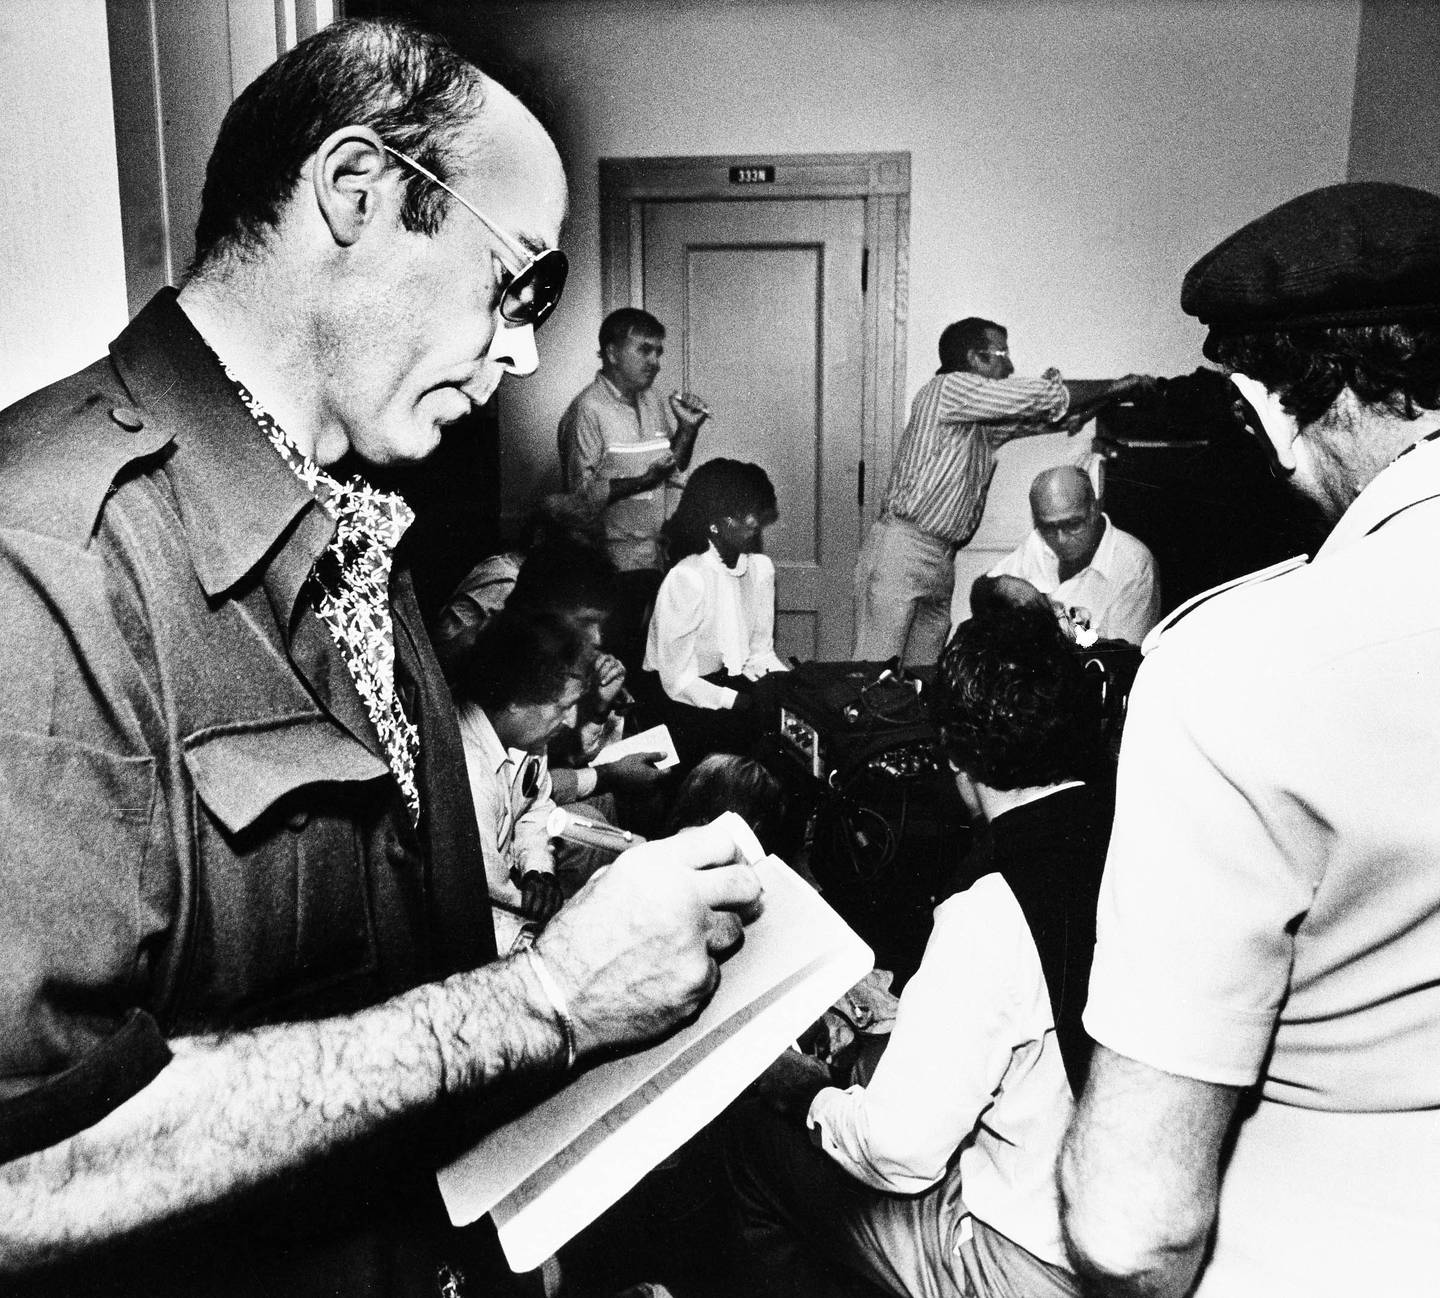 Hunter S. Thompson, Rolling Stone writer and author, checks his notes as he listens to testimony during Pulitzer trial in West Palm Beach, Fla.. November 4, 1982. Reporters from three continents have converged on the courthouse in Palm Beach to cover the trial. (AP Photo/Ray Fairall)